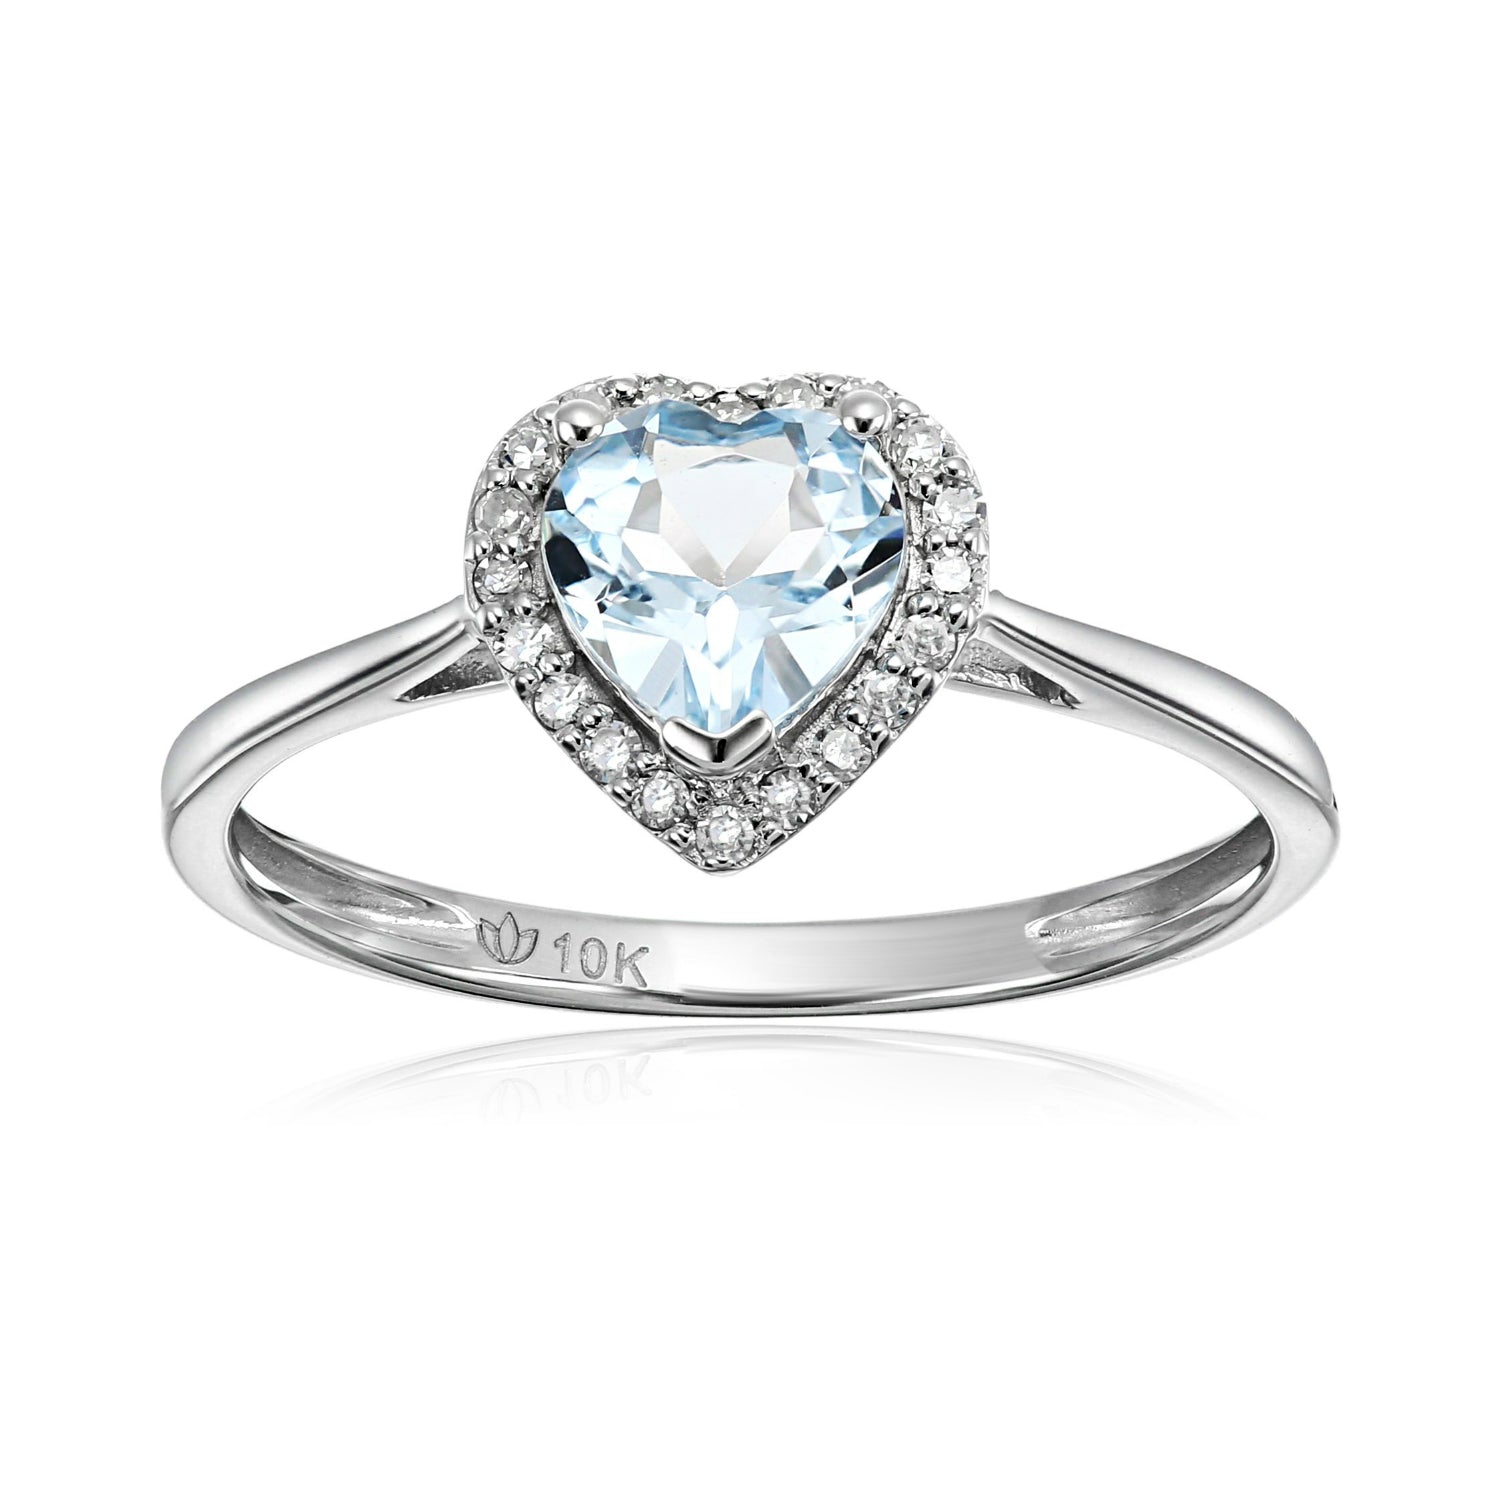 10k White Gold Aquamarine and Diamond Solitaire Heart Halo Engagement Ring (1/10cttw, H-I Color, I1-I2 Clarity), - pinctore